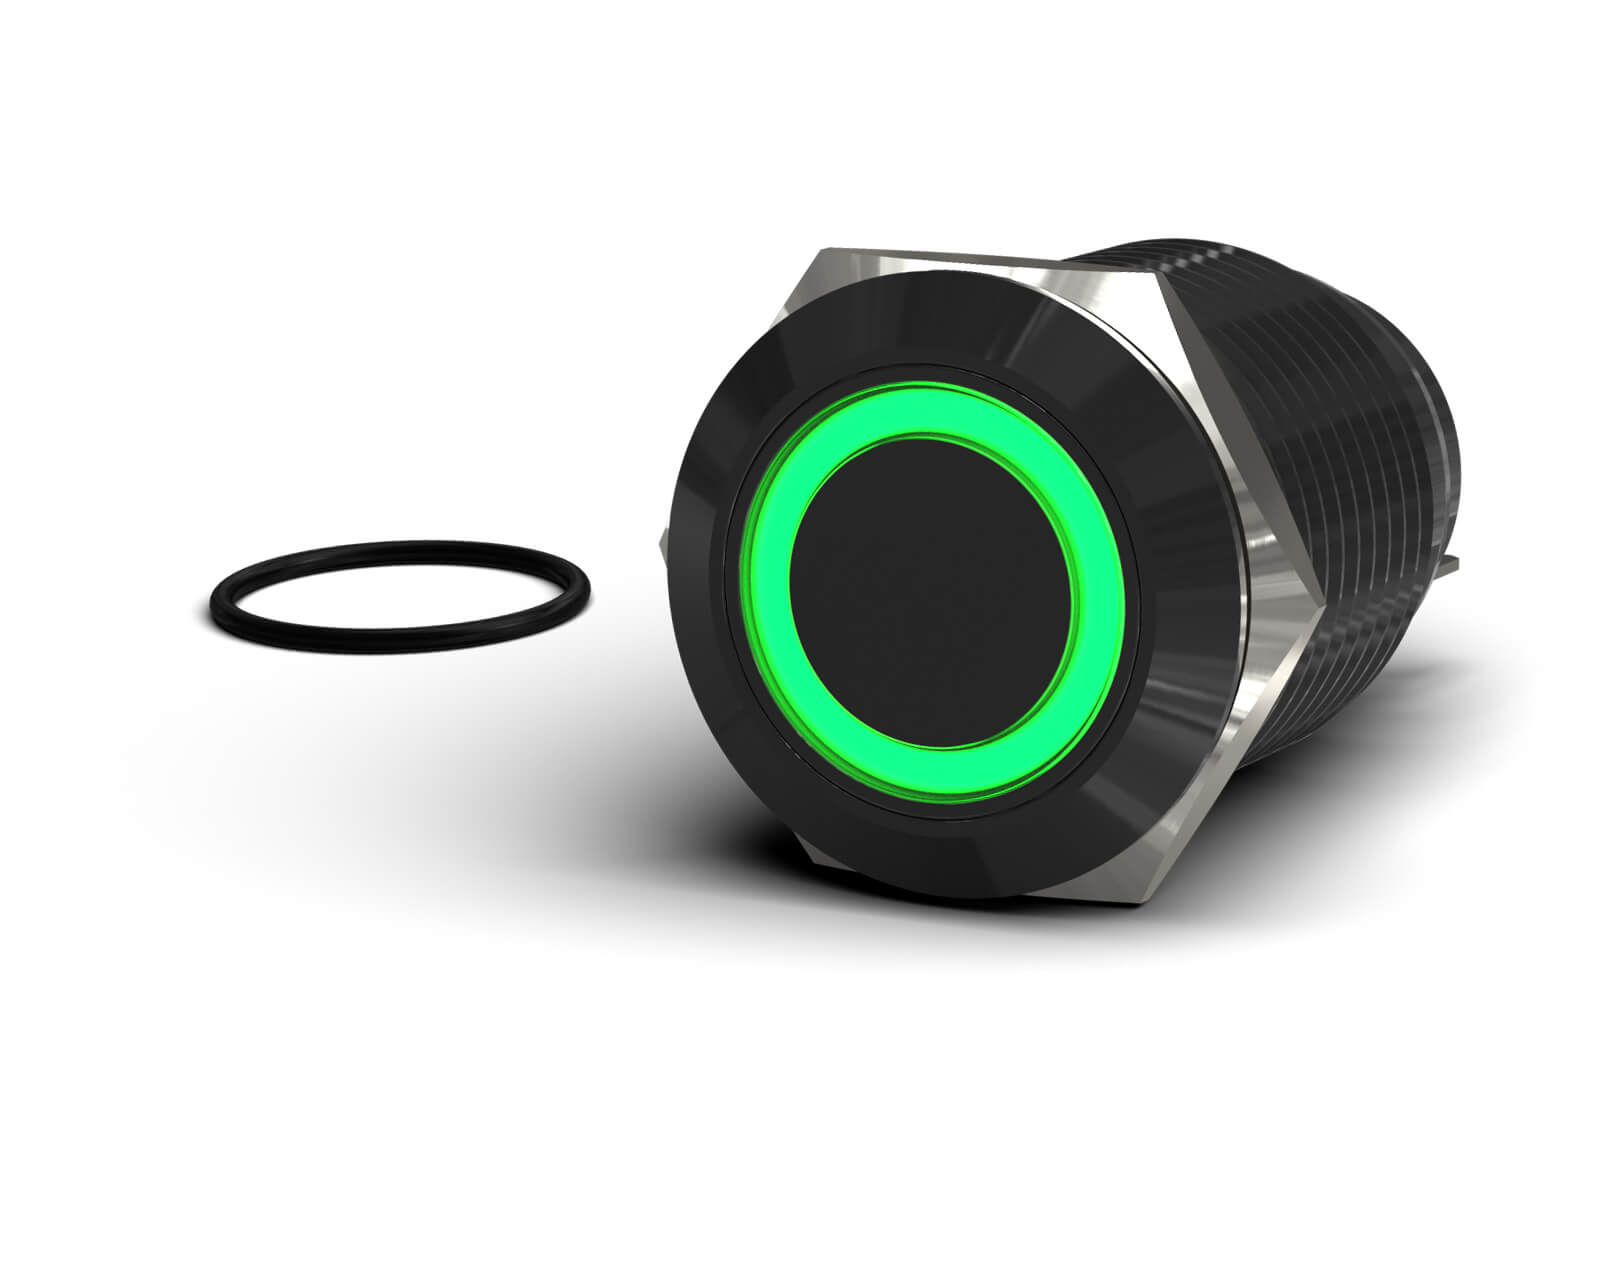 PrimoChill Black Aluminum Momentary Vandal Resistant Switch - 22mm - PrimoChill - KEEPING IT COOL Green LED Ring